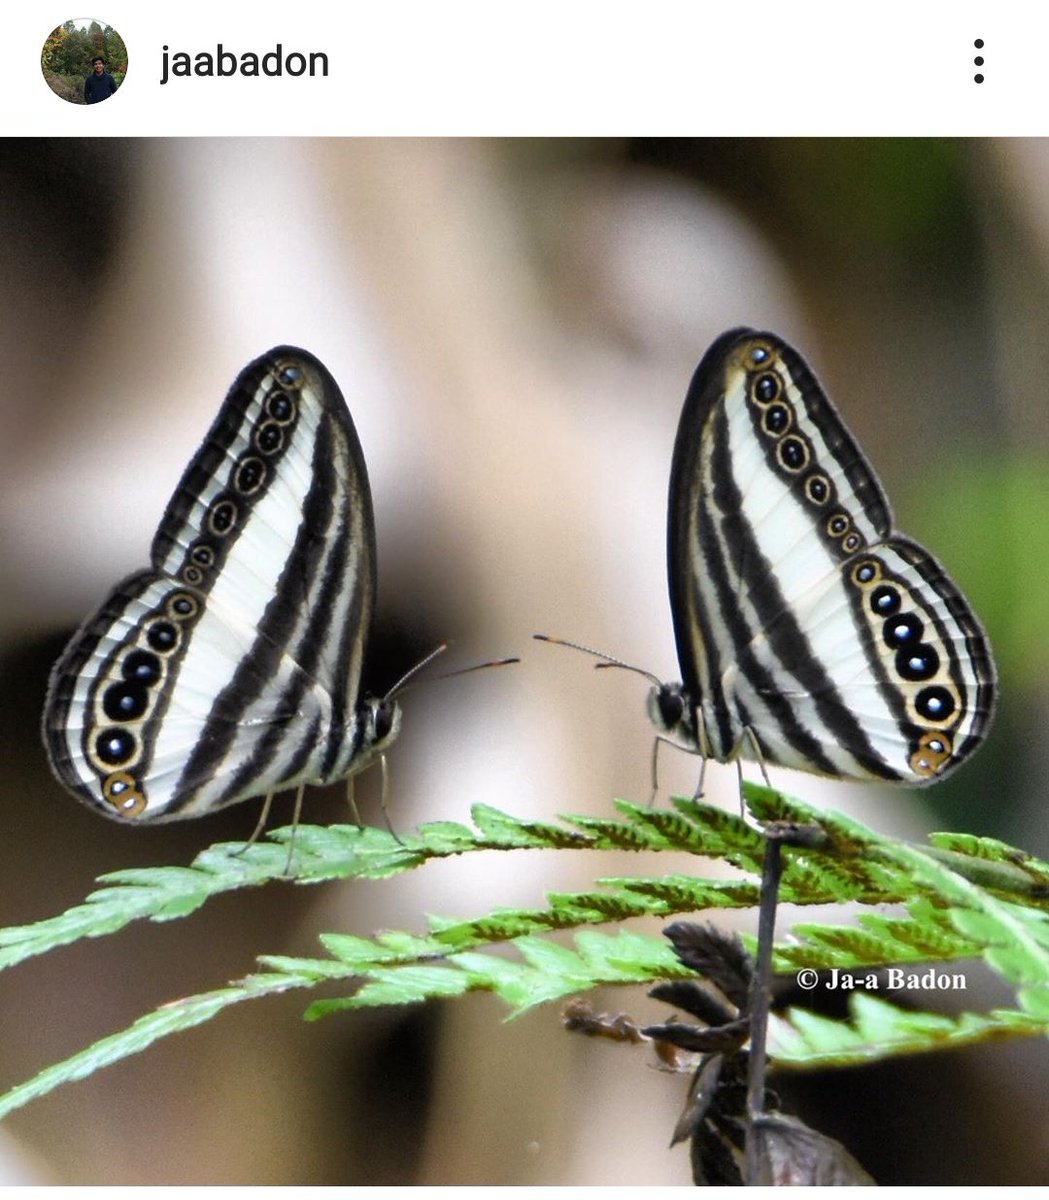  #DYK there are 352 species of  #butterflies endemic to the Philippines? Here are 2 Striped ringlet butterflies in courtship dance position photographed in Balinsasayao Twin Lakes  Follow  @jaa_99badon on his IG for more lepidopteran beauties   #IDB2020  #BiodiversityDay